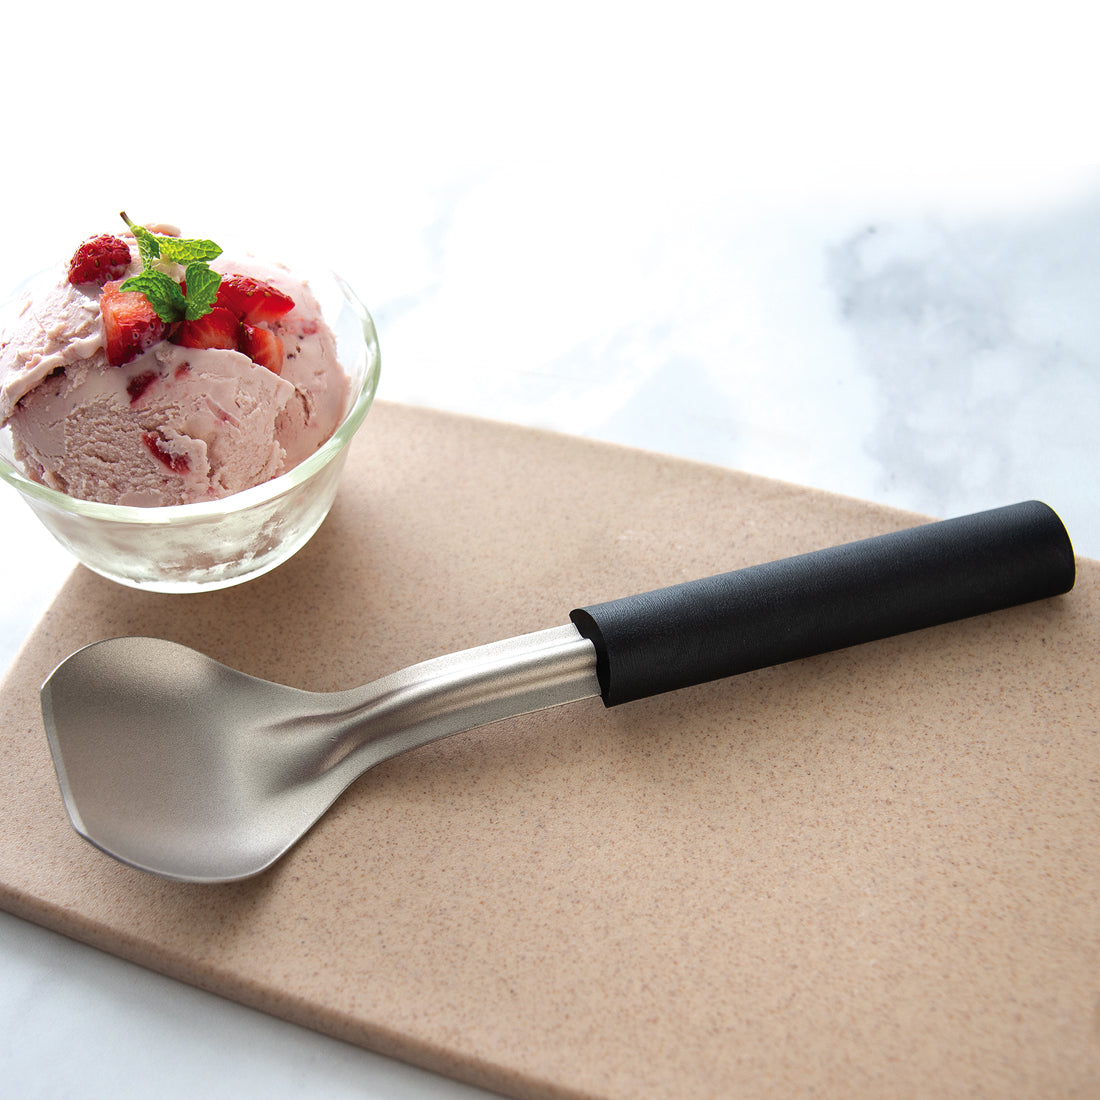 An Ice Cream Scoop next to a bowl of strawberry ice cream